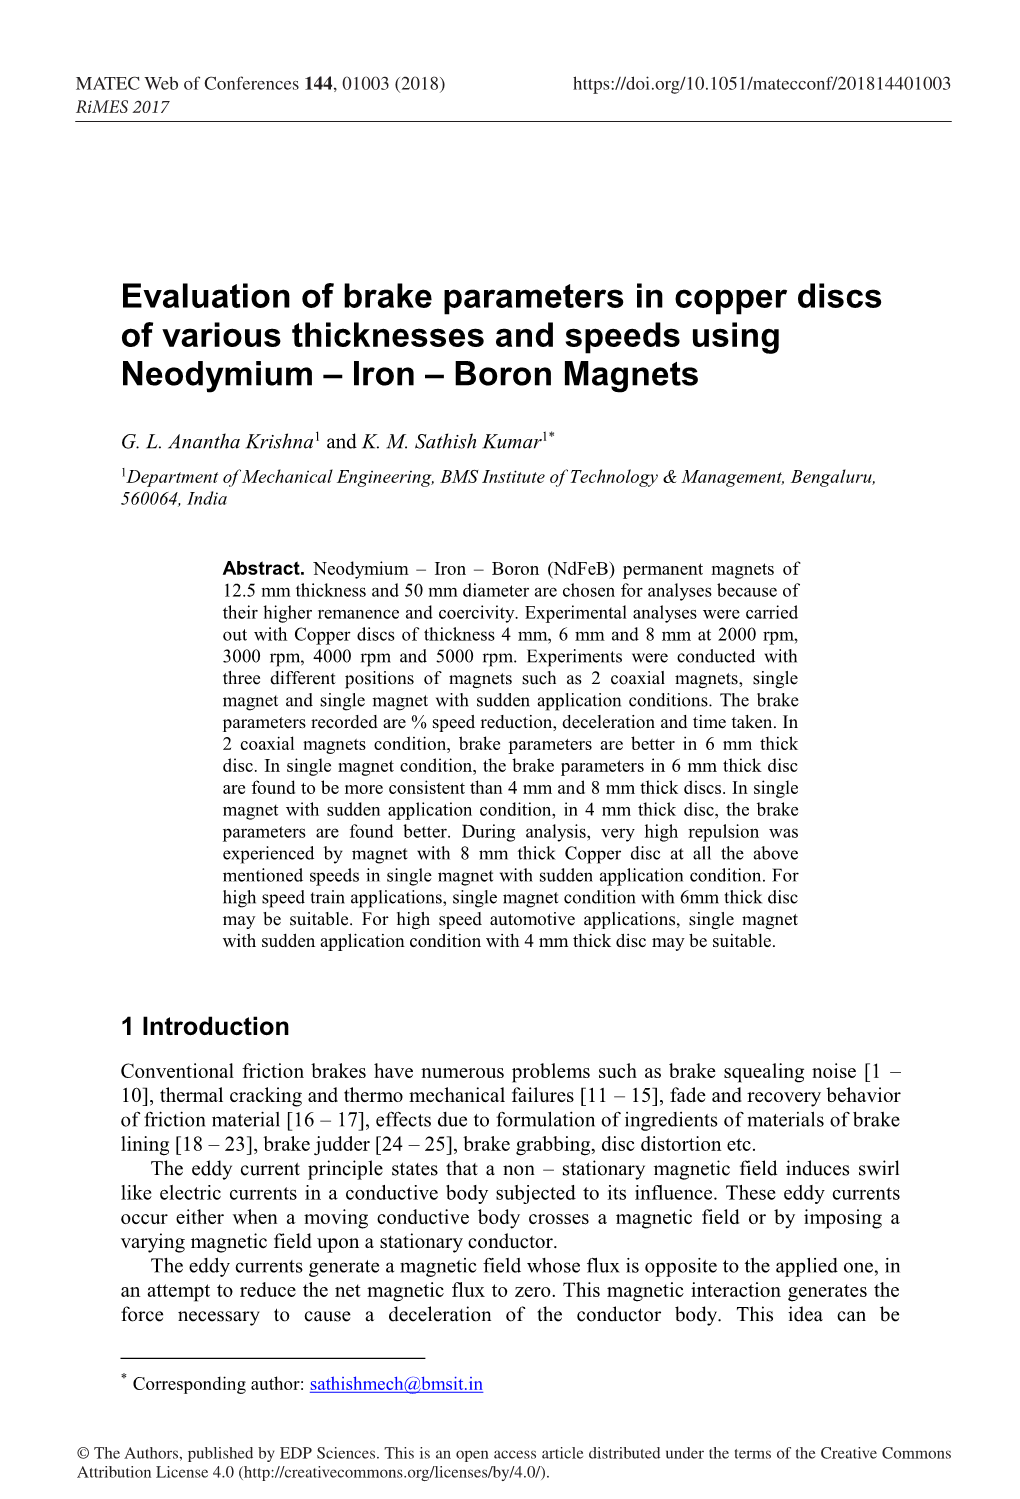 Evaluation of Brake Parameters in Copper Discs of Various Thicknesses and Speeds Using Neodymium – Iron – Boron Magnets